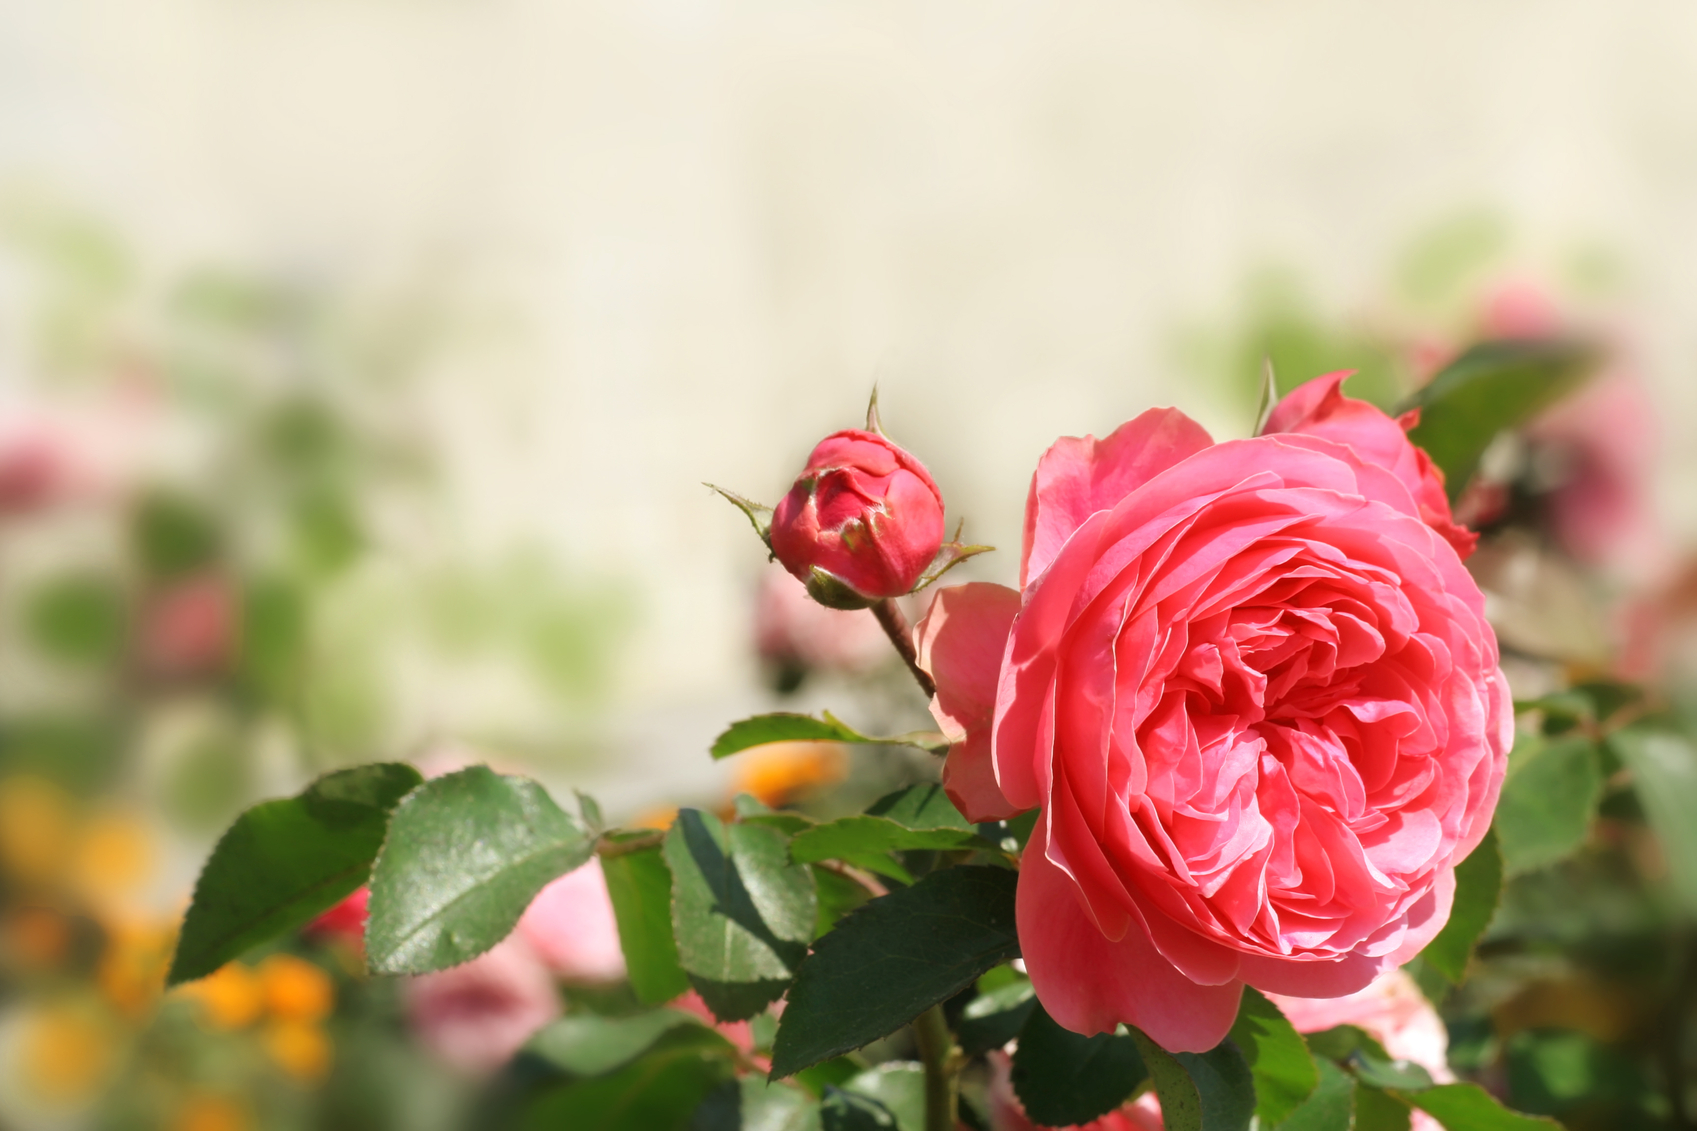 How to grow roses